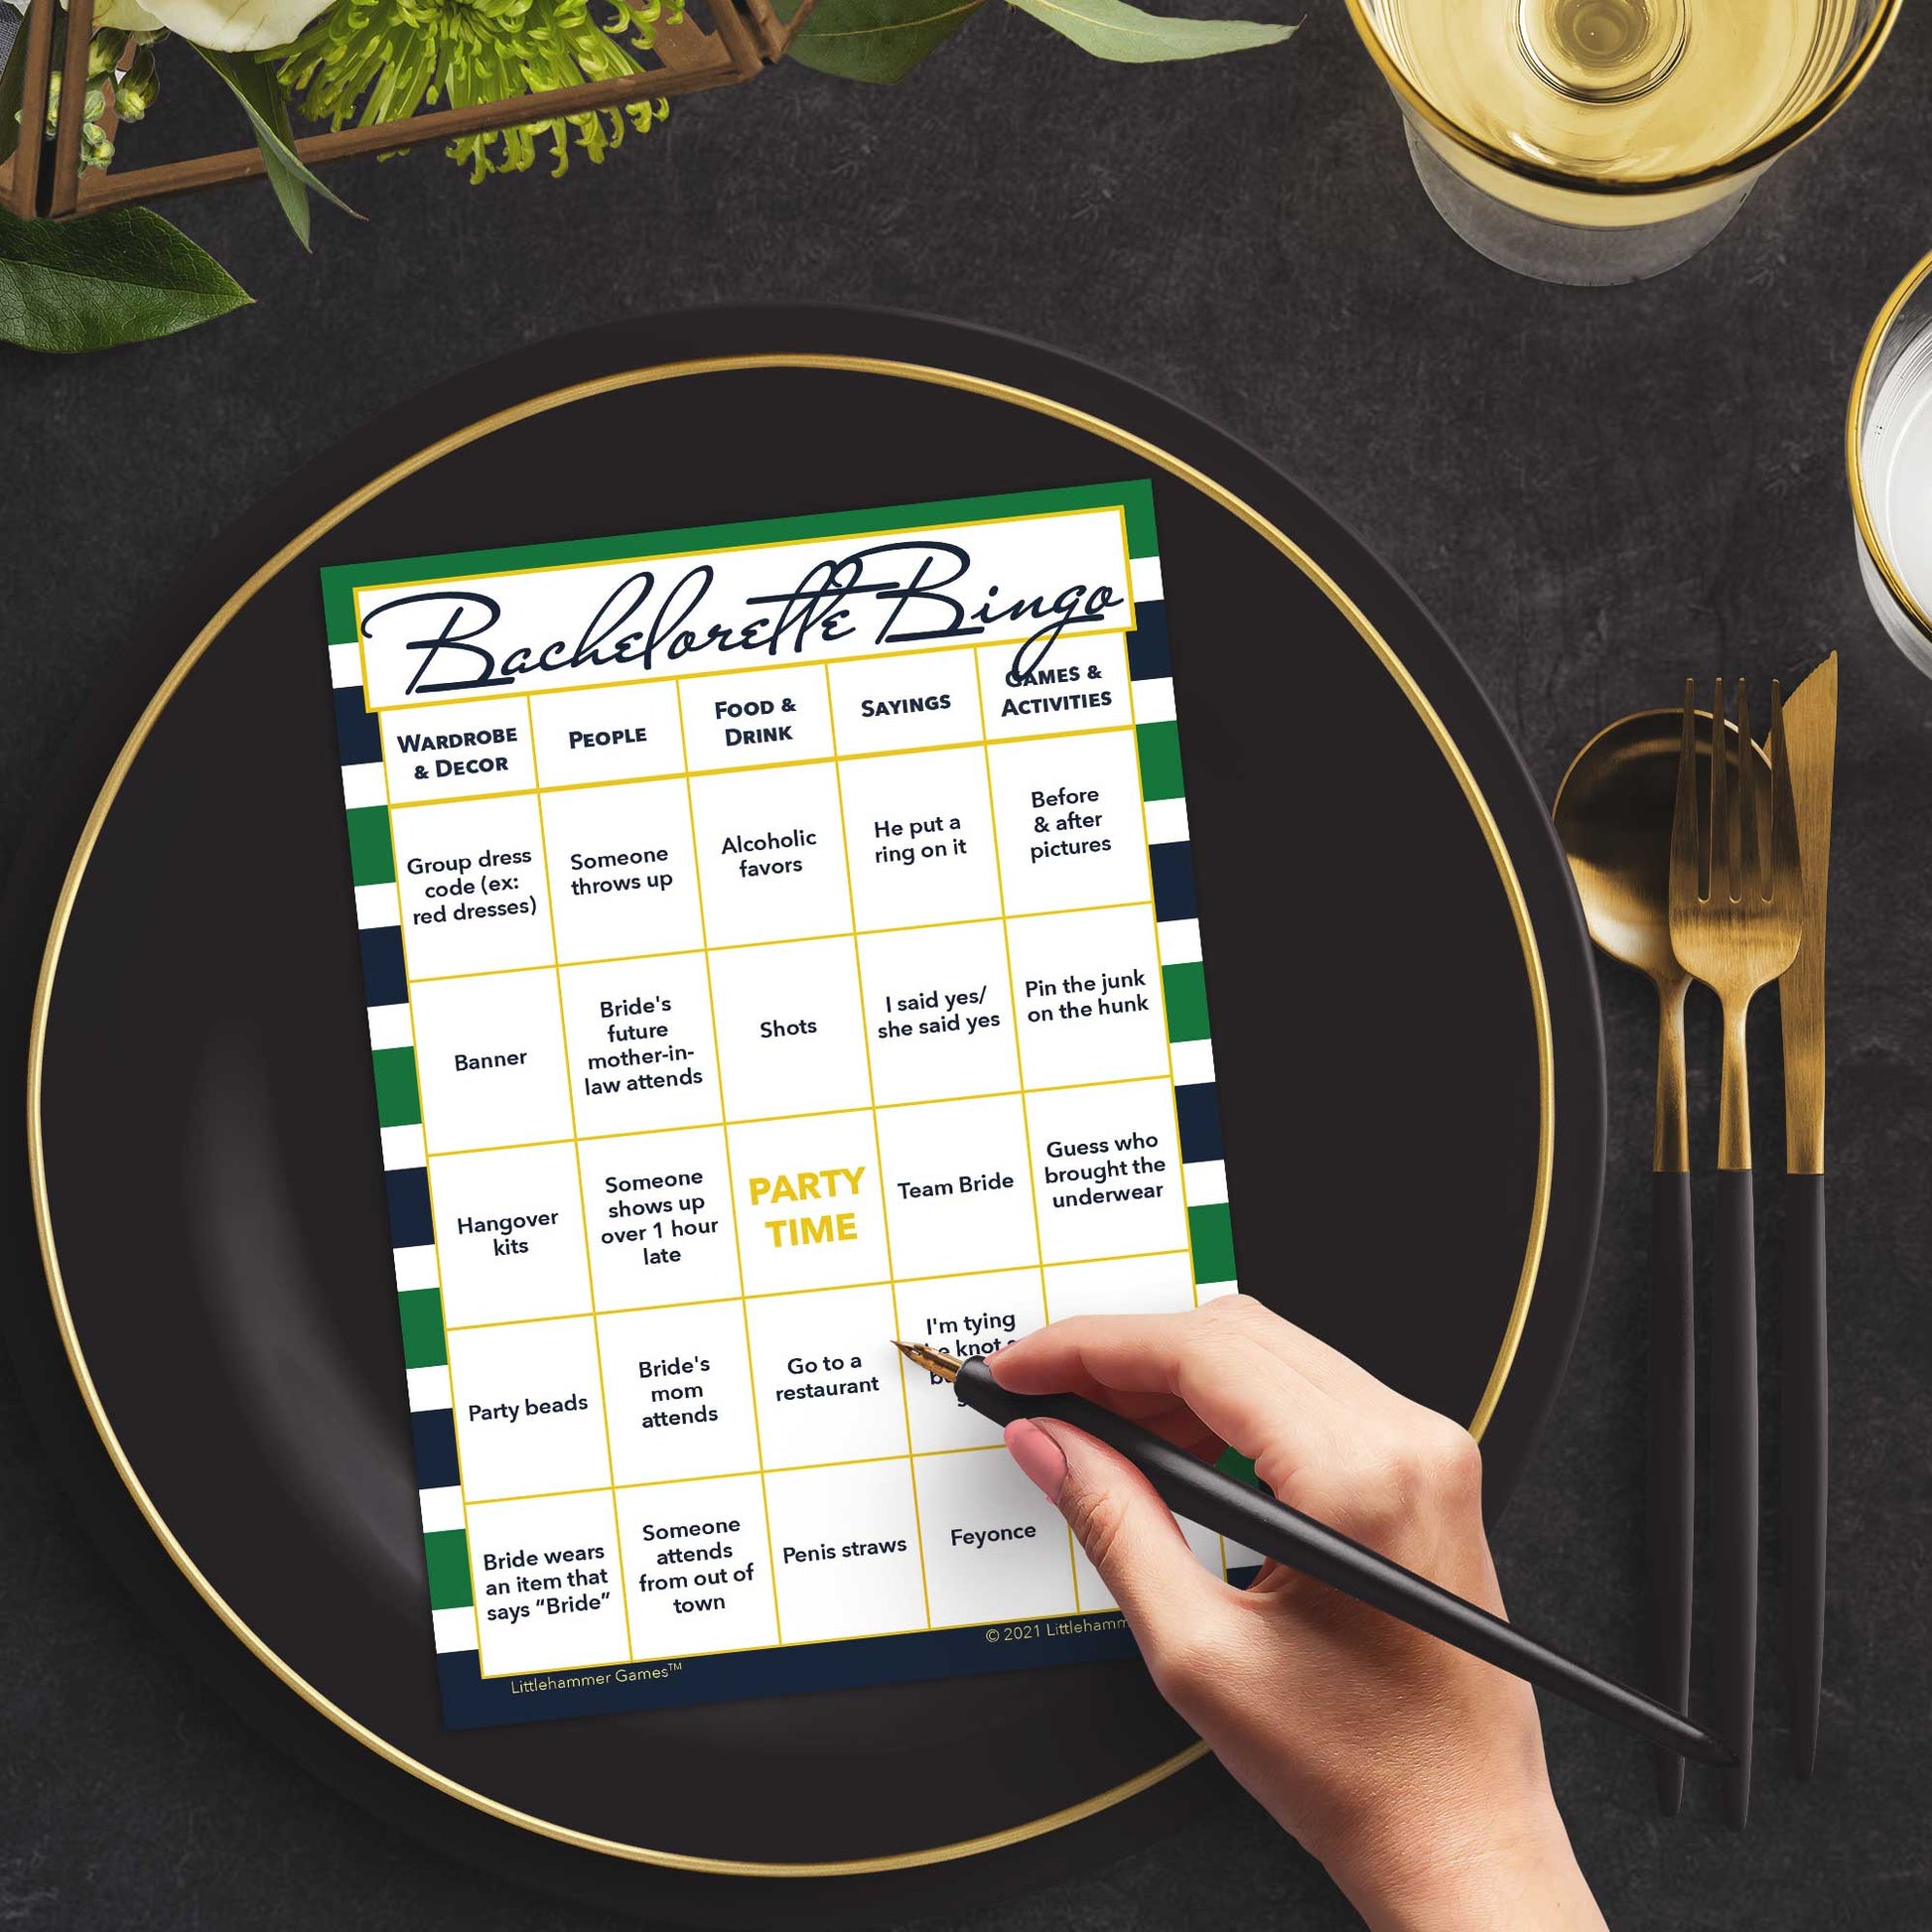 Woman with a pen sitting at a table with a green and navy-striped Bachelorette Bingo game card on a gold and black plate on a dark place setting